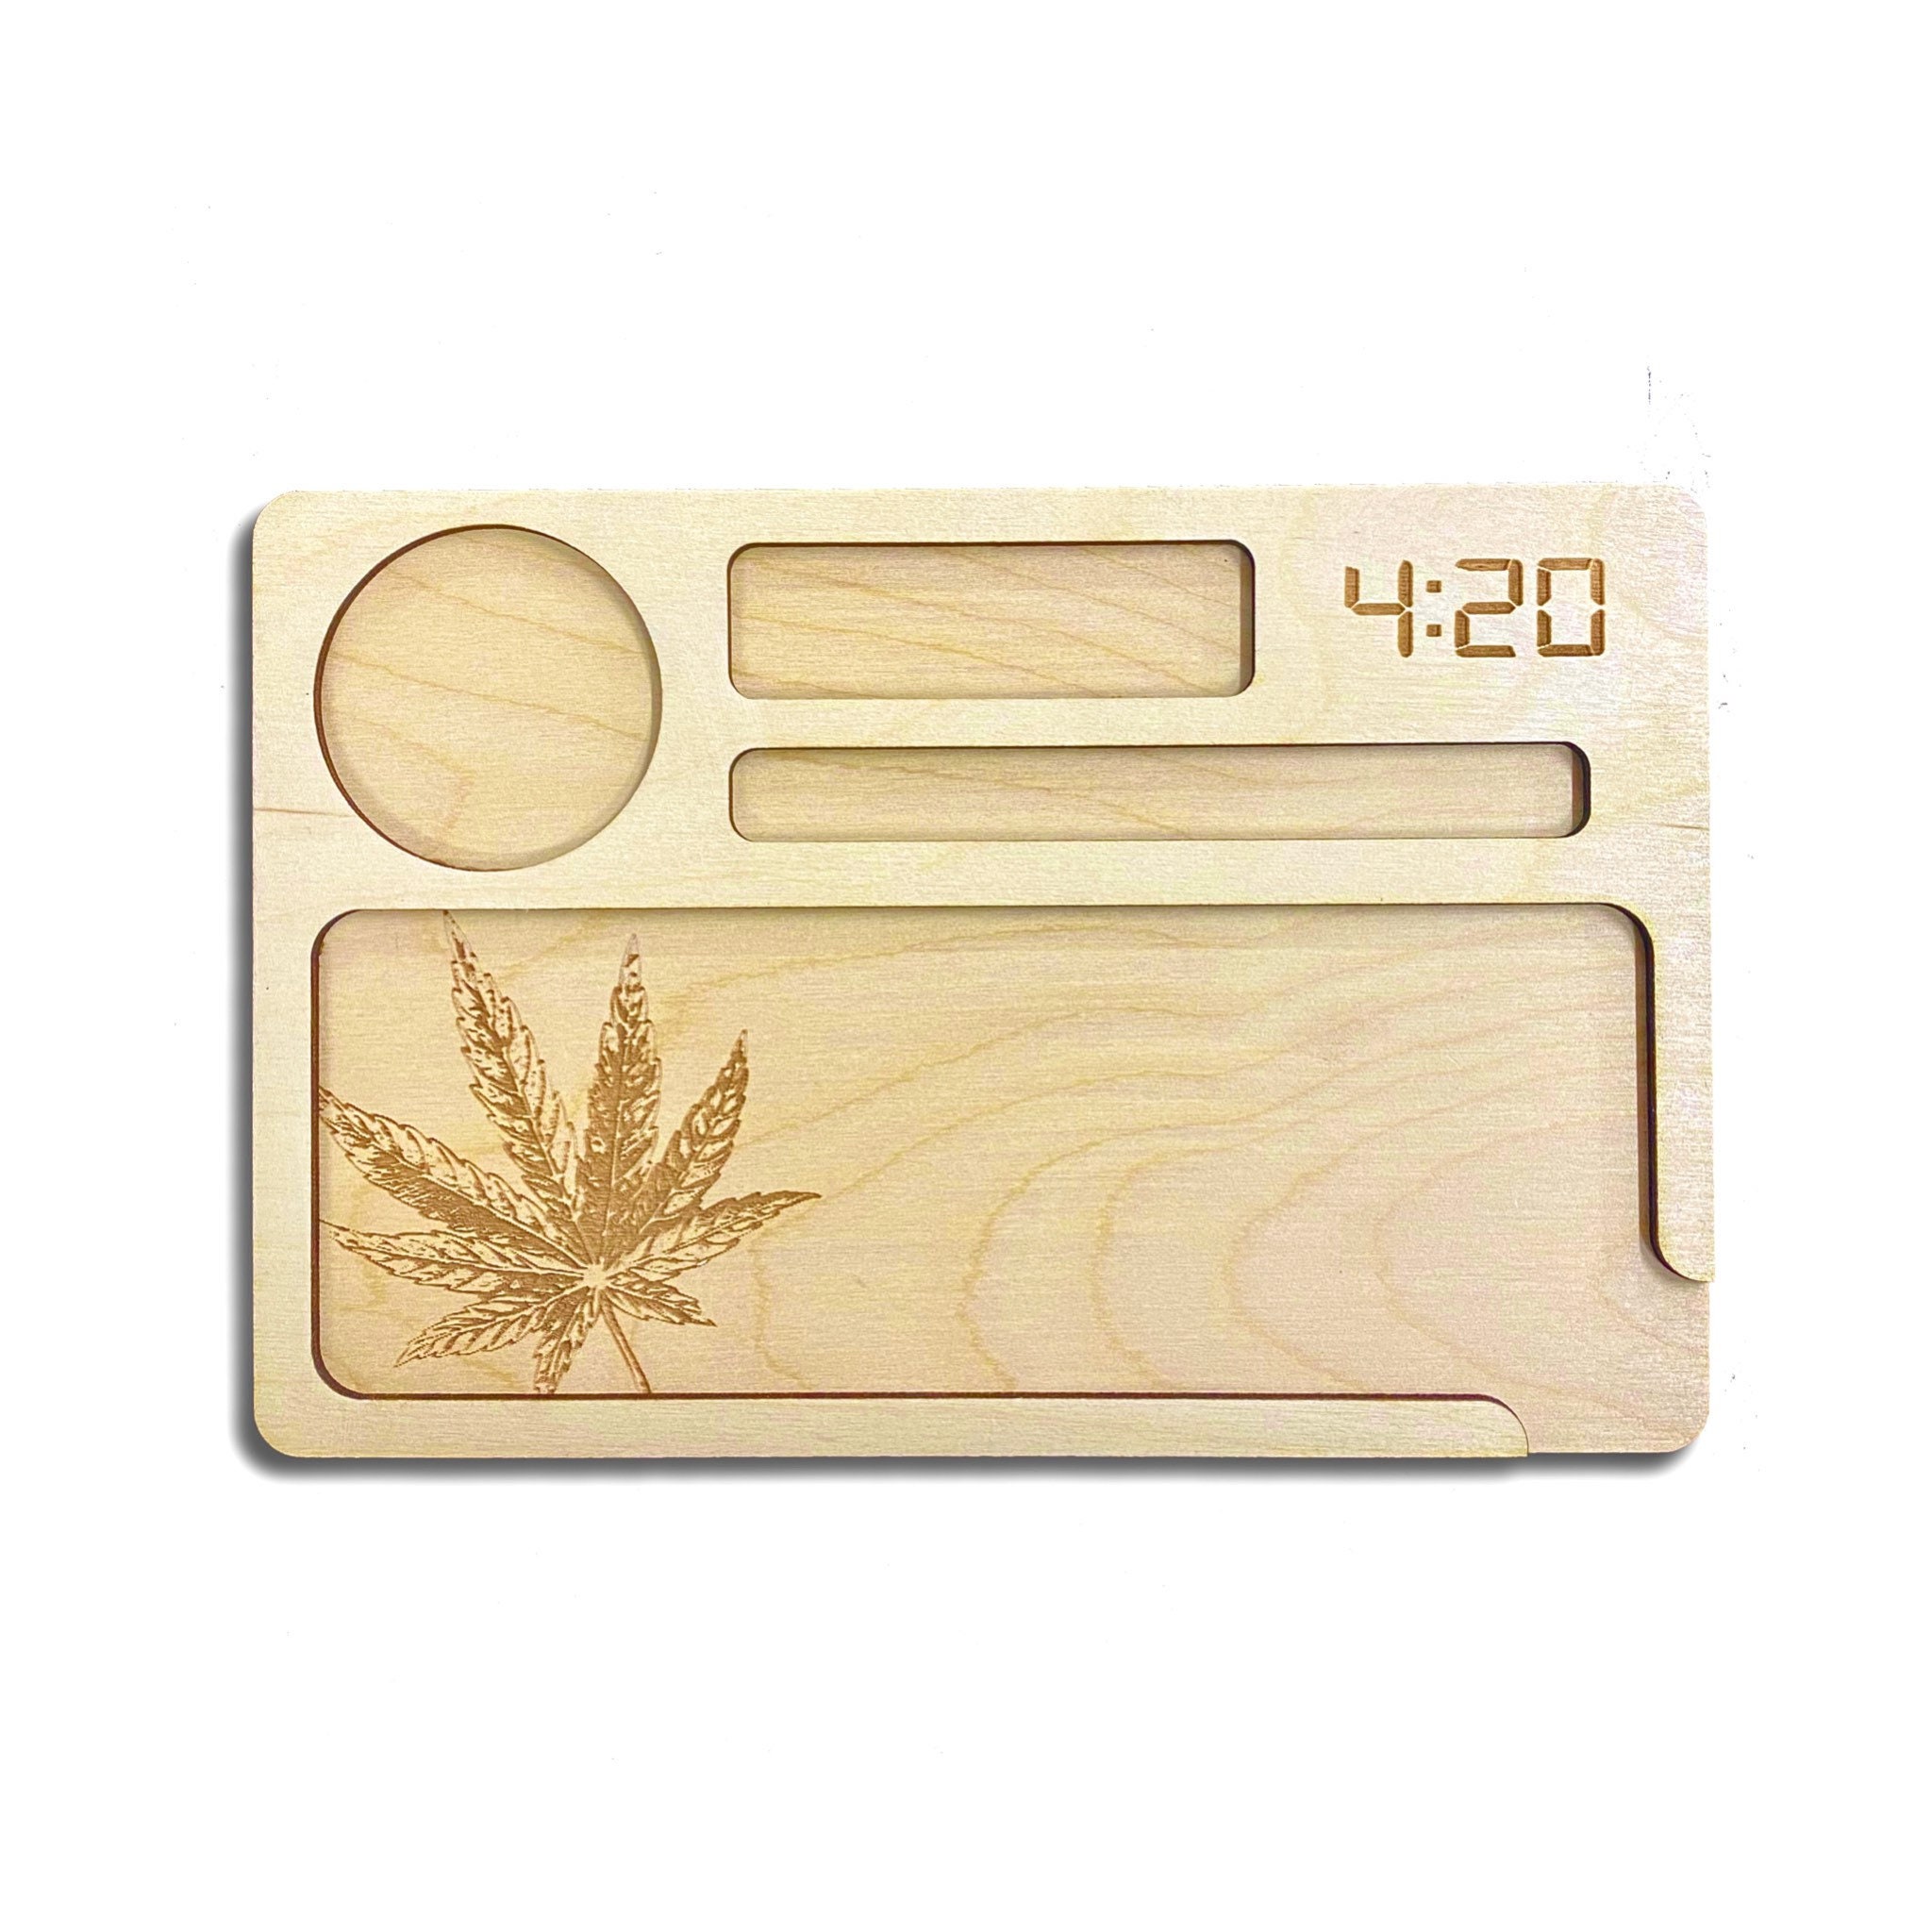 Personalizable Gifts Weed Tray Customized Wooden Weed Rolling Tray  Marijuana Laser Cut Personalized Wood Christmas Gifts Laser Engraved 